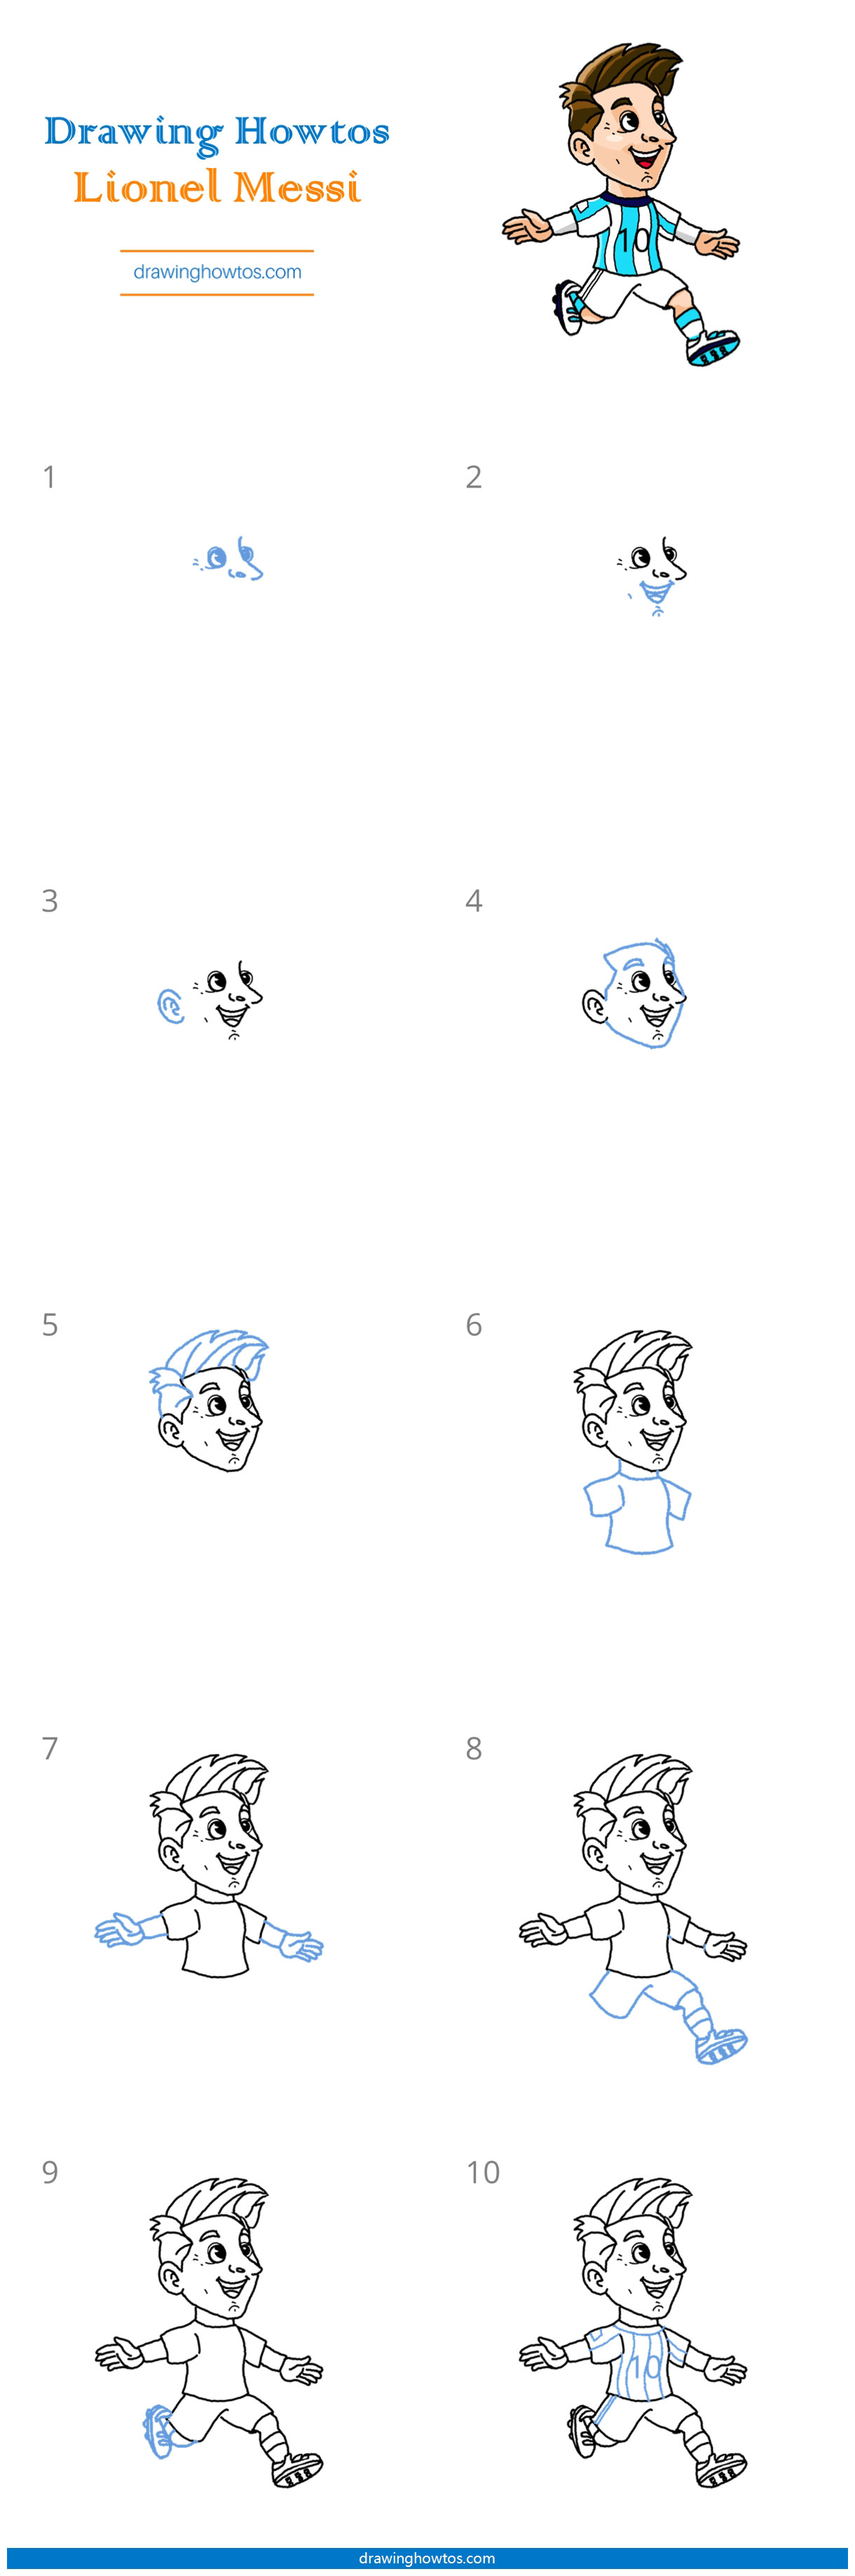 How to Draw Messi Step by Step